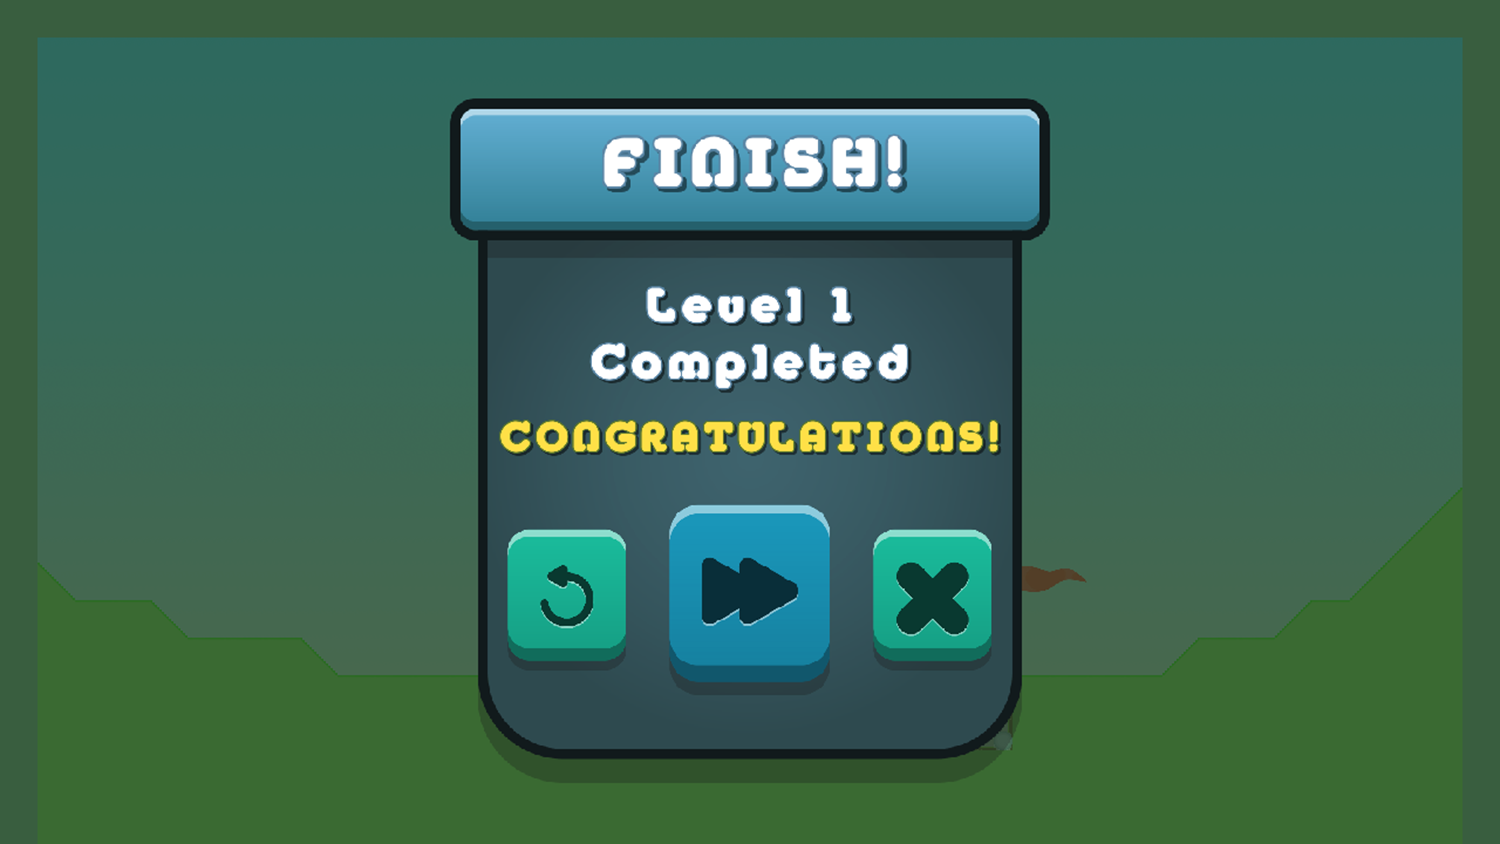 Golf Mania Game Level Completed Screenshot.